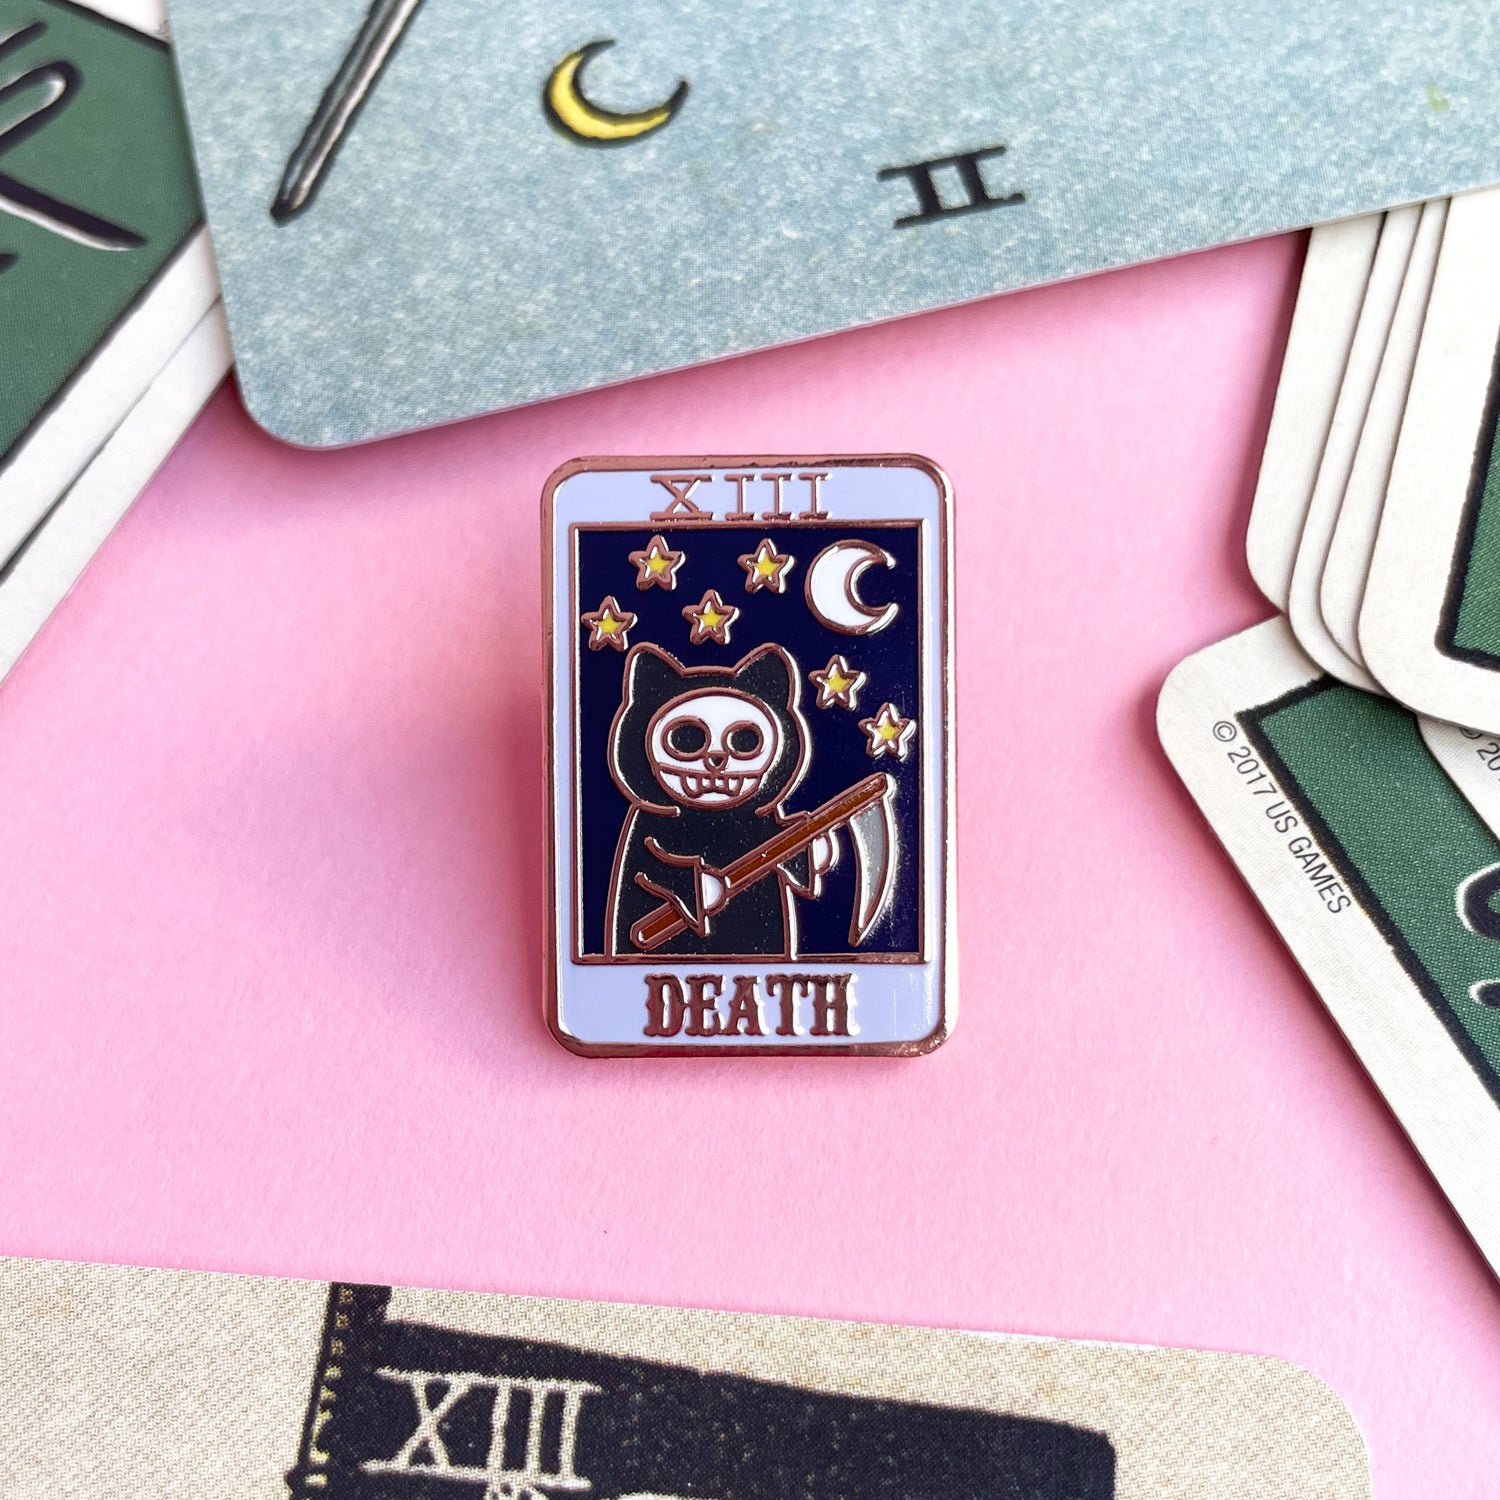 An enamel pin shaped like a tarot card with a grim reaper cat with a night sky on it and the word "Death" surrounded by other tarot cards.